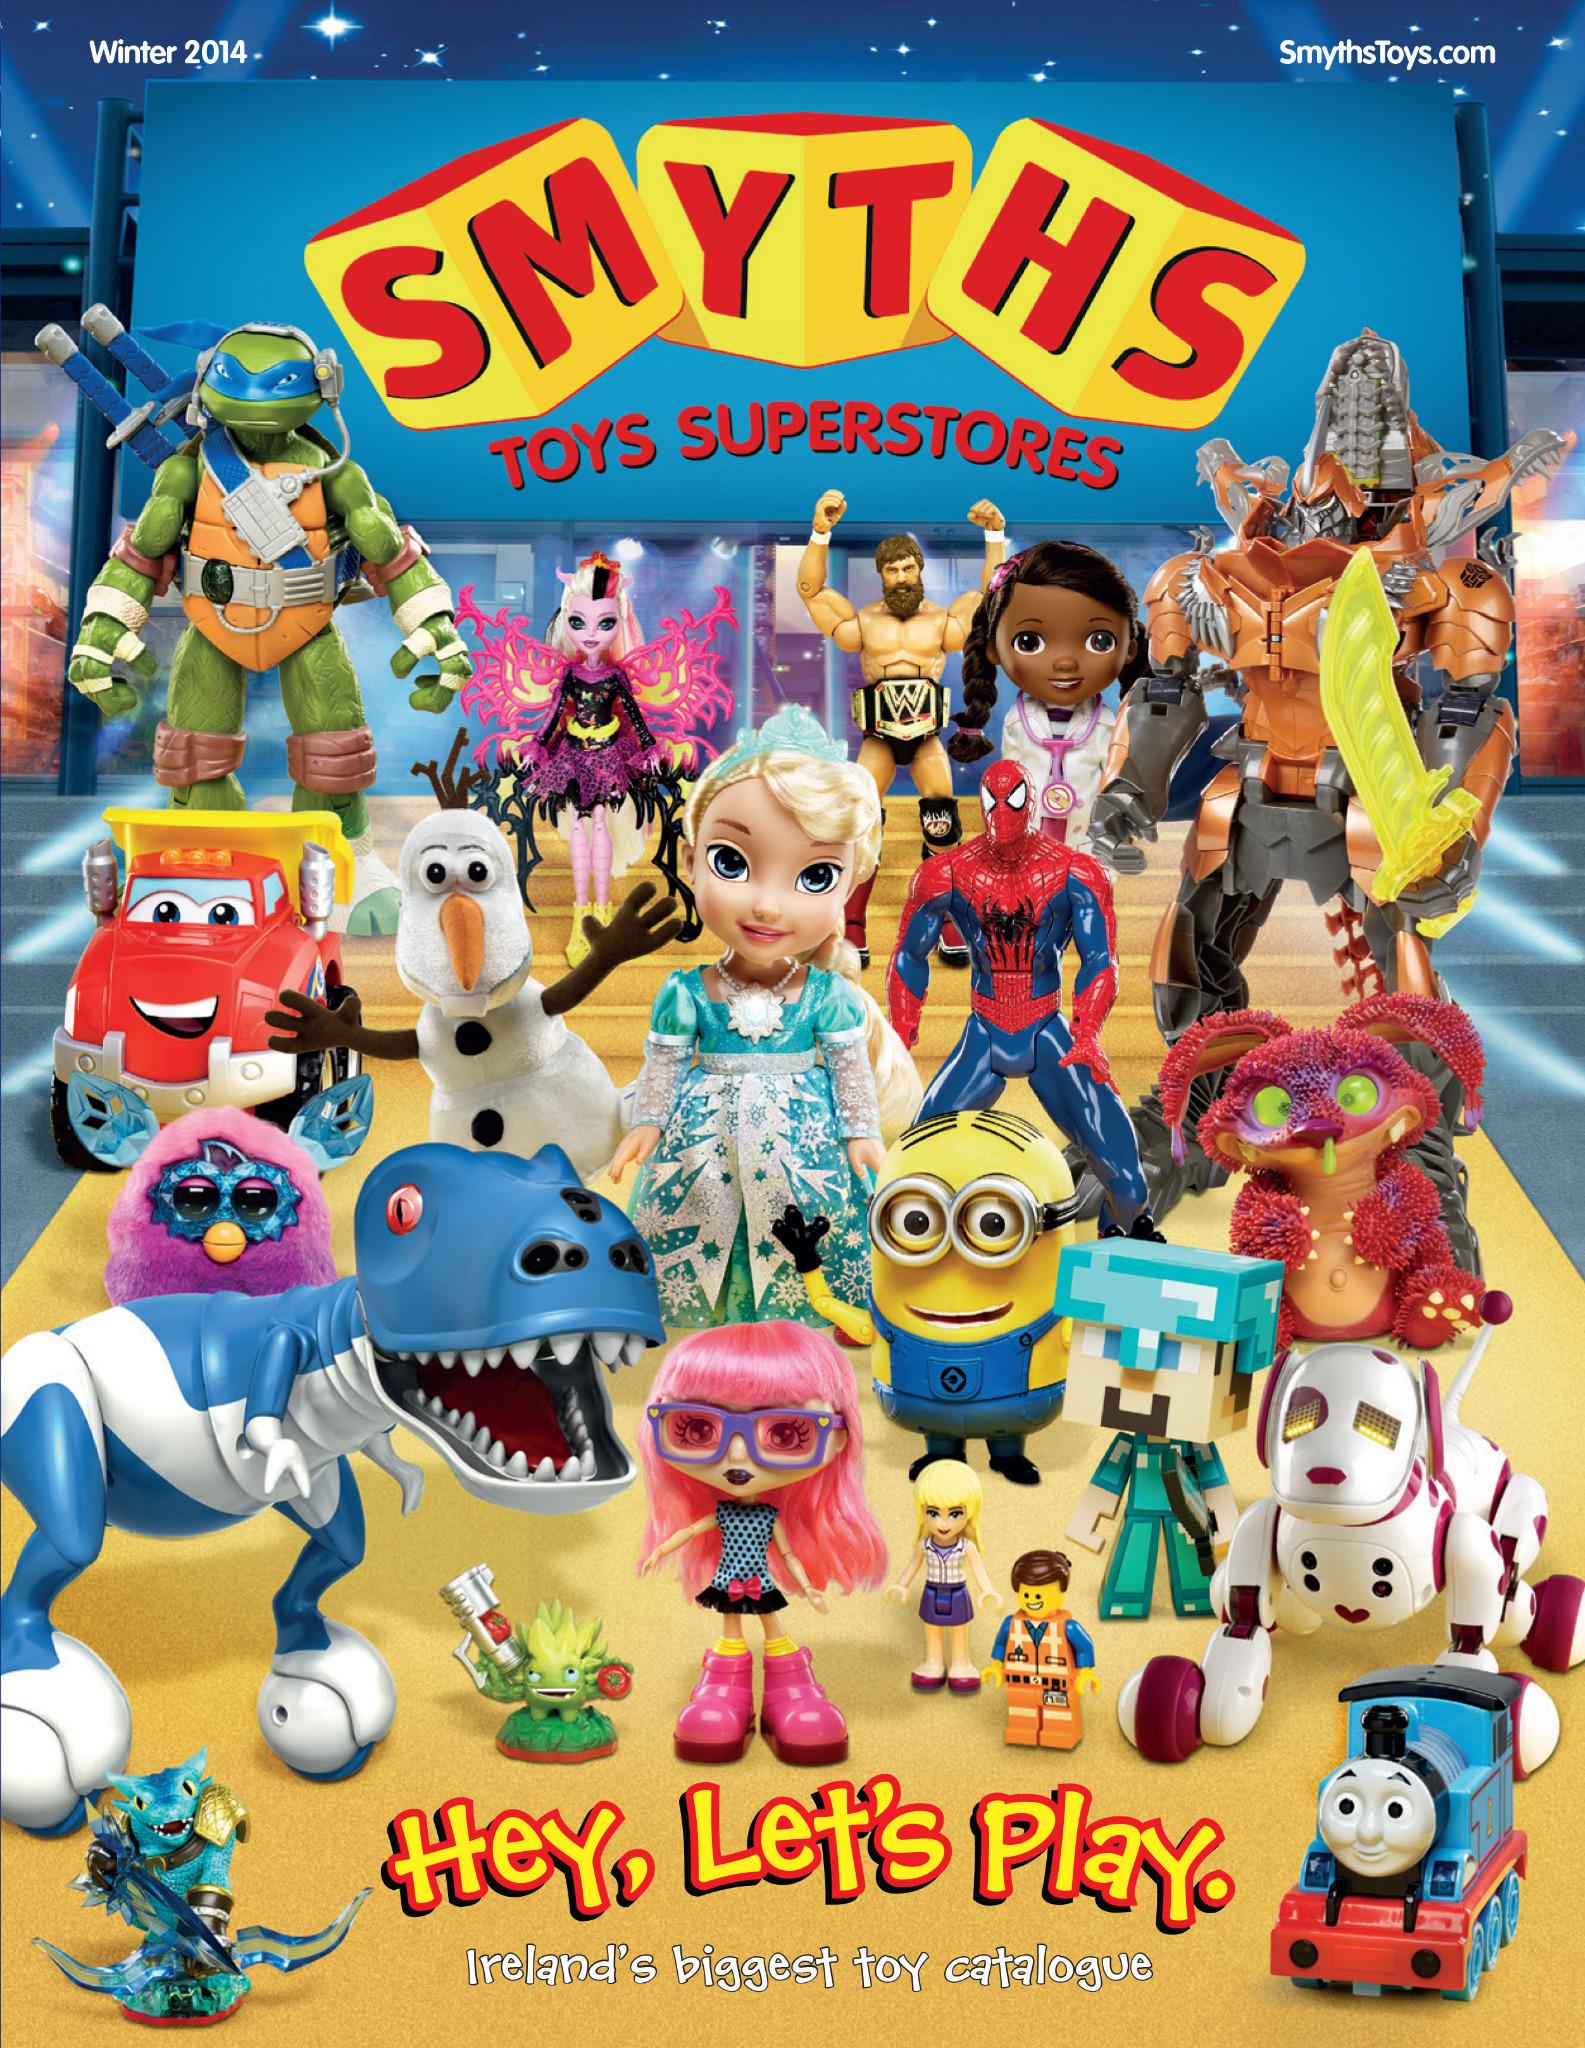 Smyths Toys Ireland on Twitter: "It's the moment you've all been